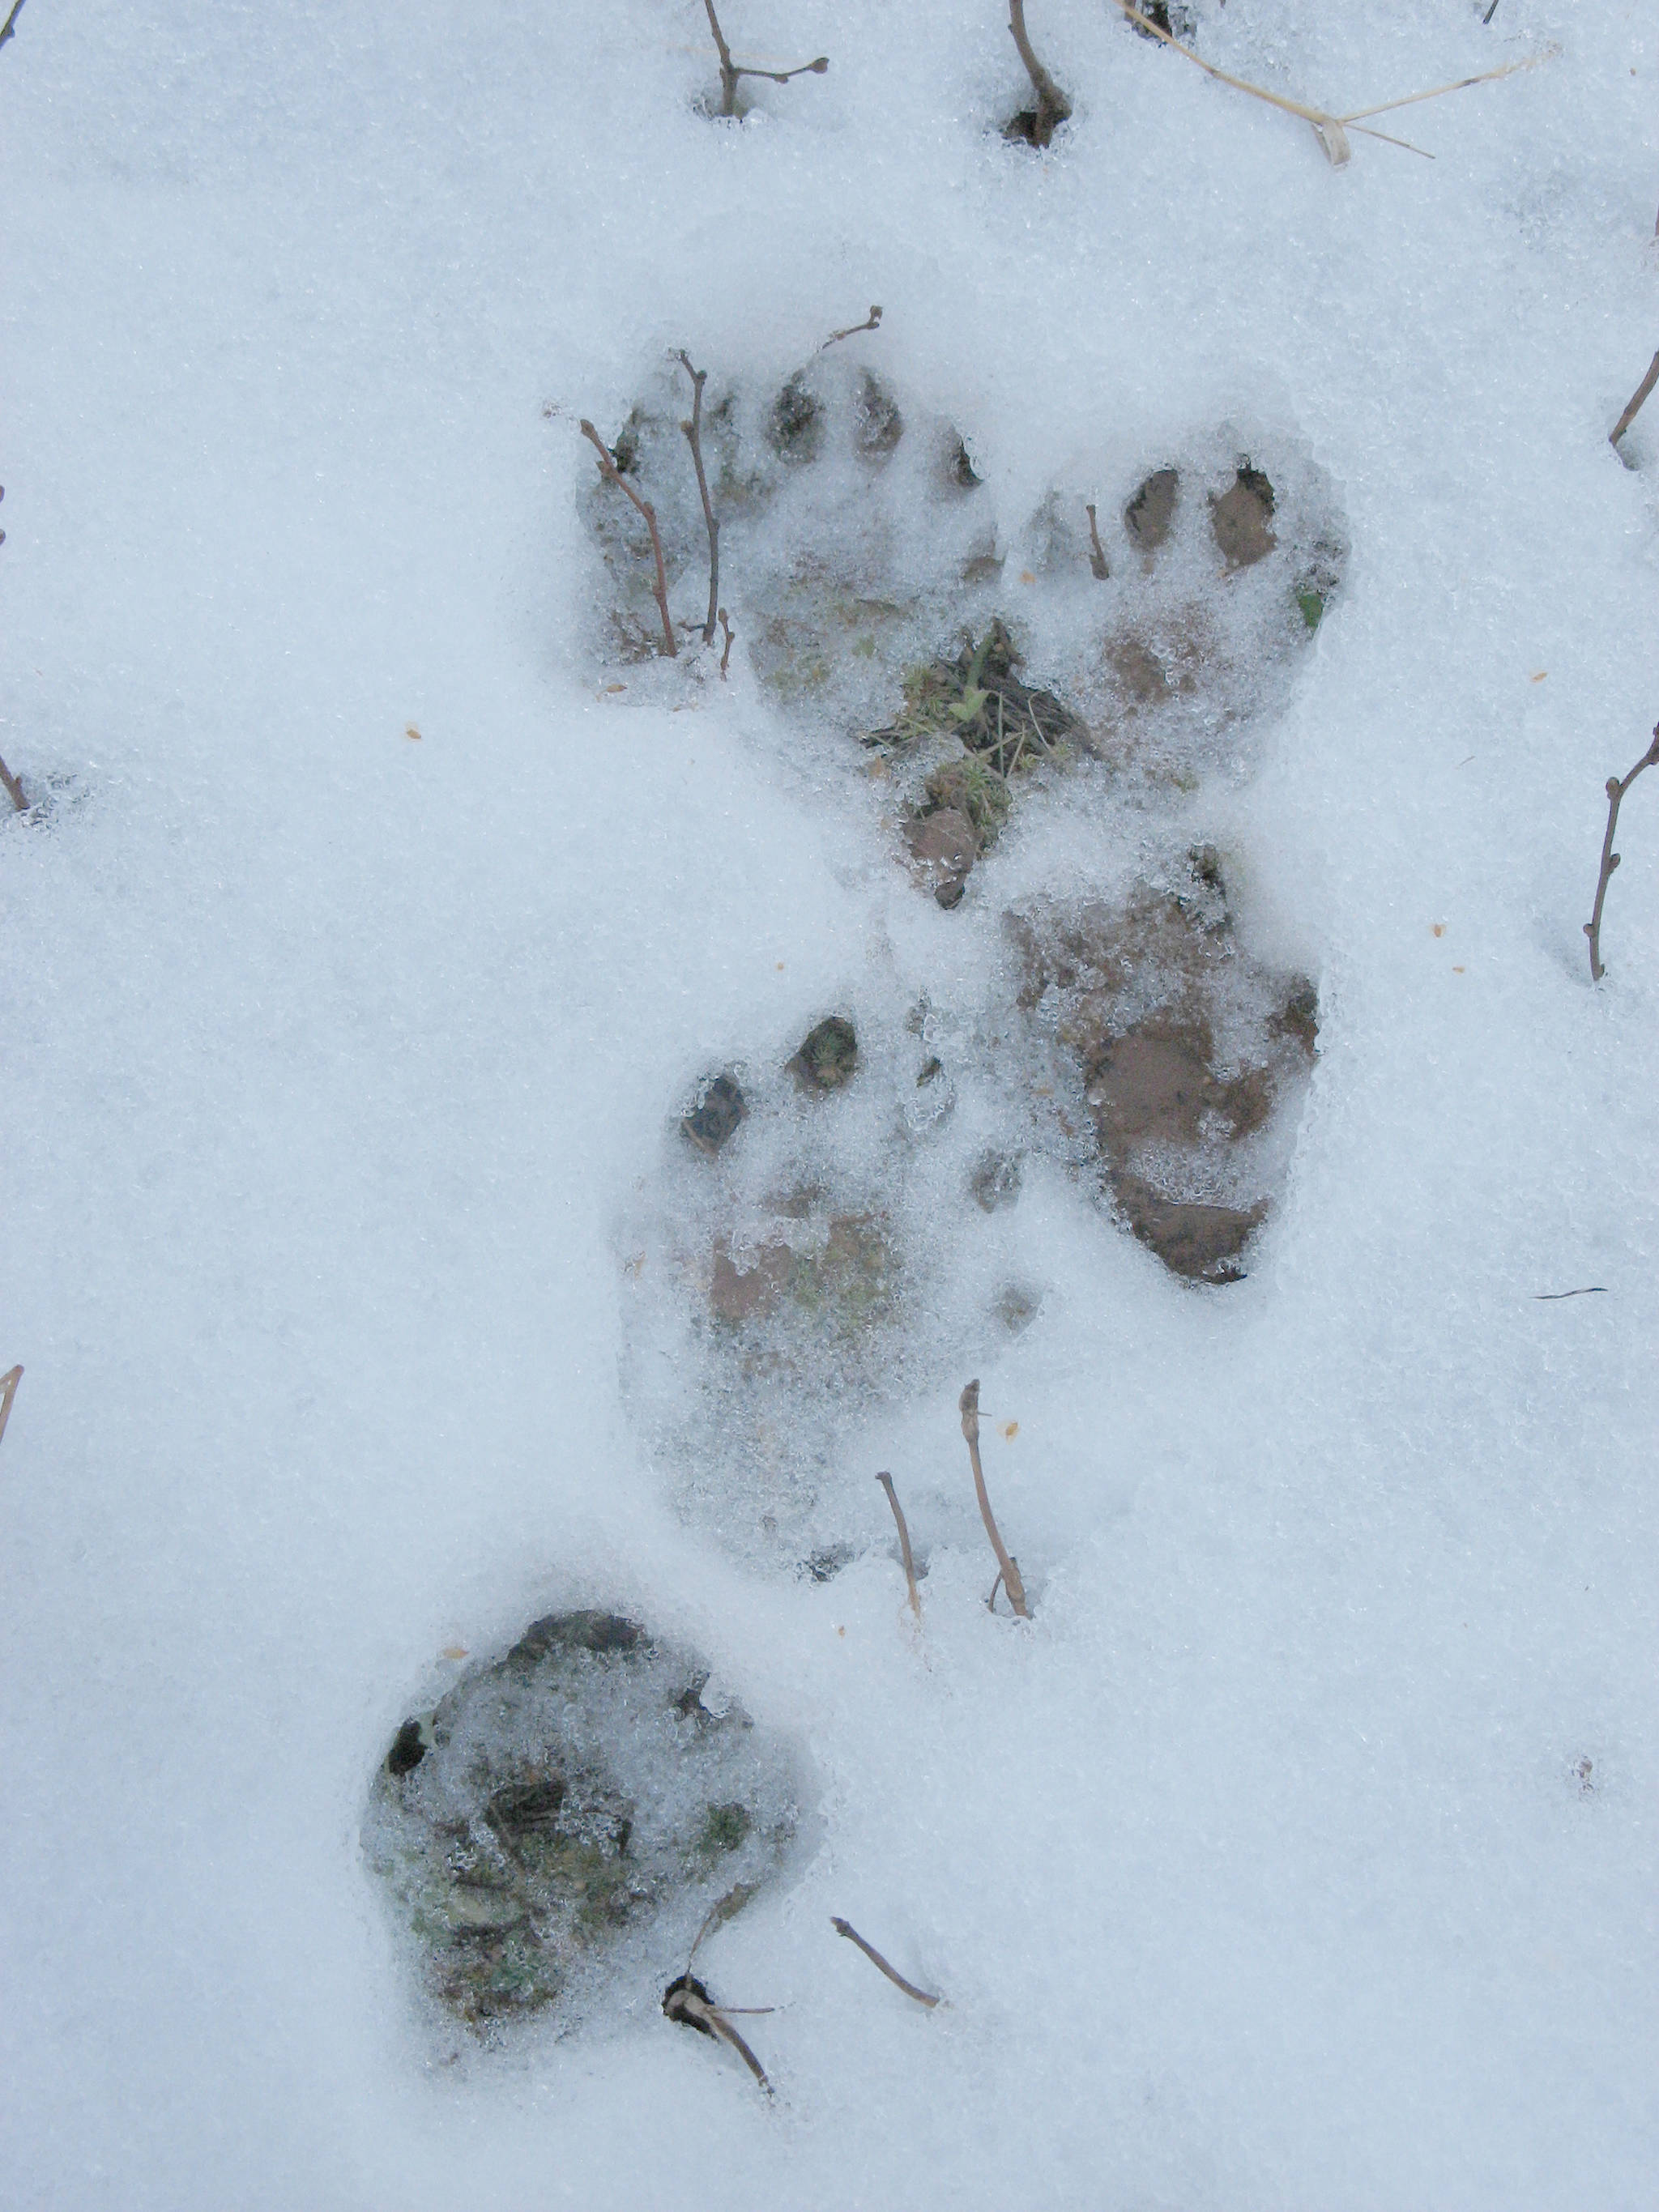 Following tracks left by American marten in the Kenai Lowlands can be a great way to experience the outdoors in winter. (Photo by Andy Baltensperger)